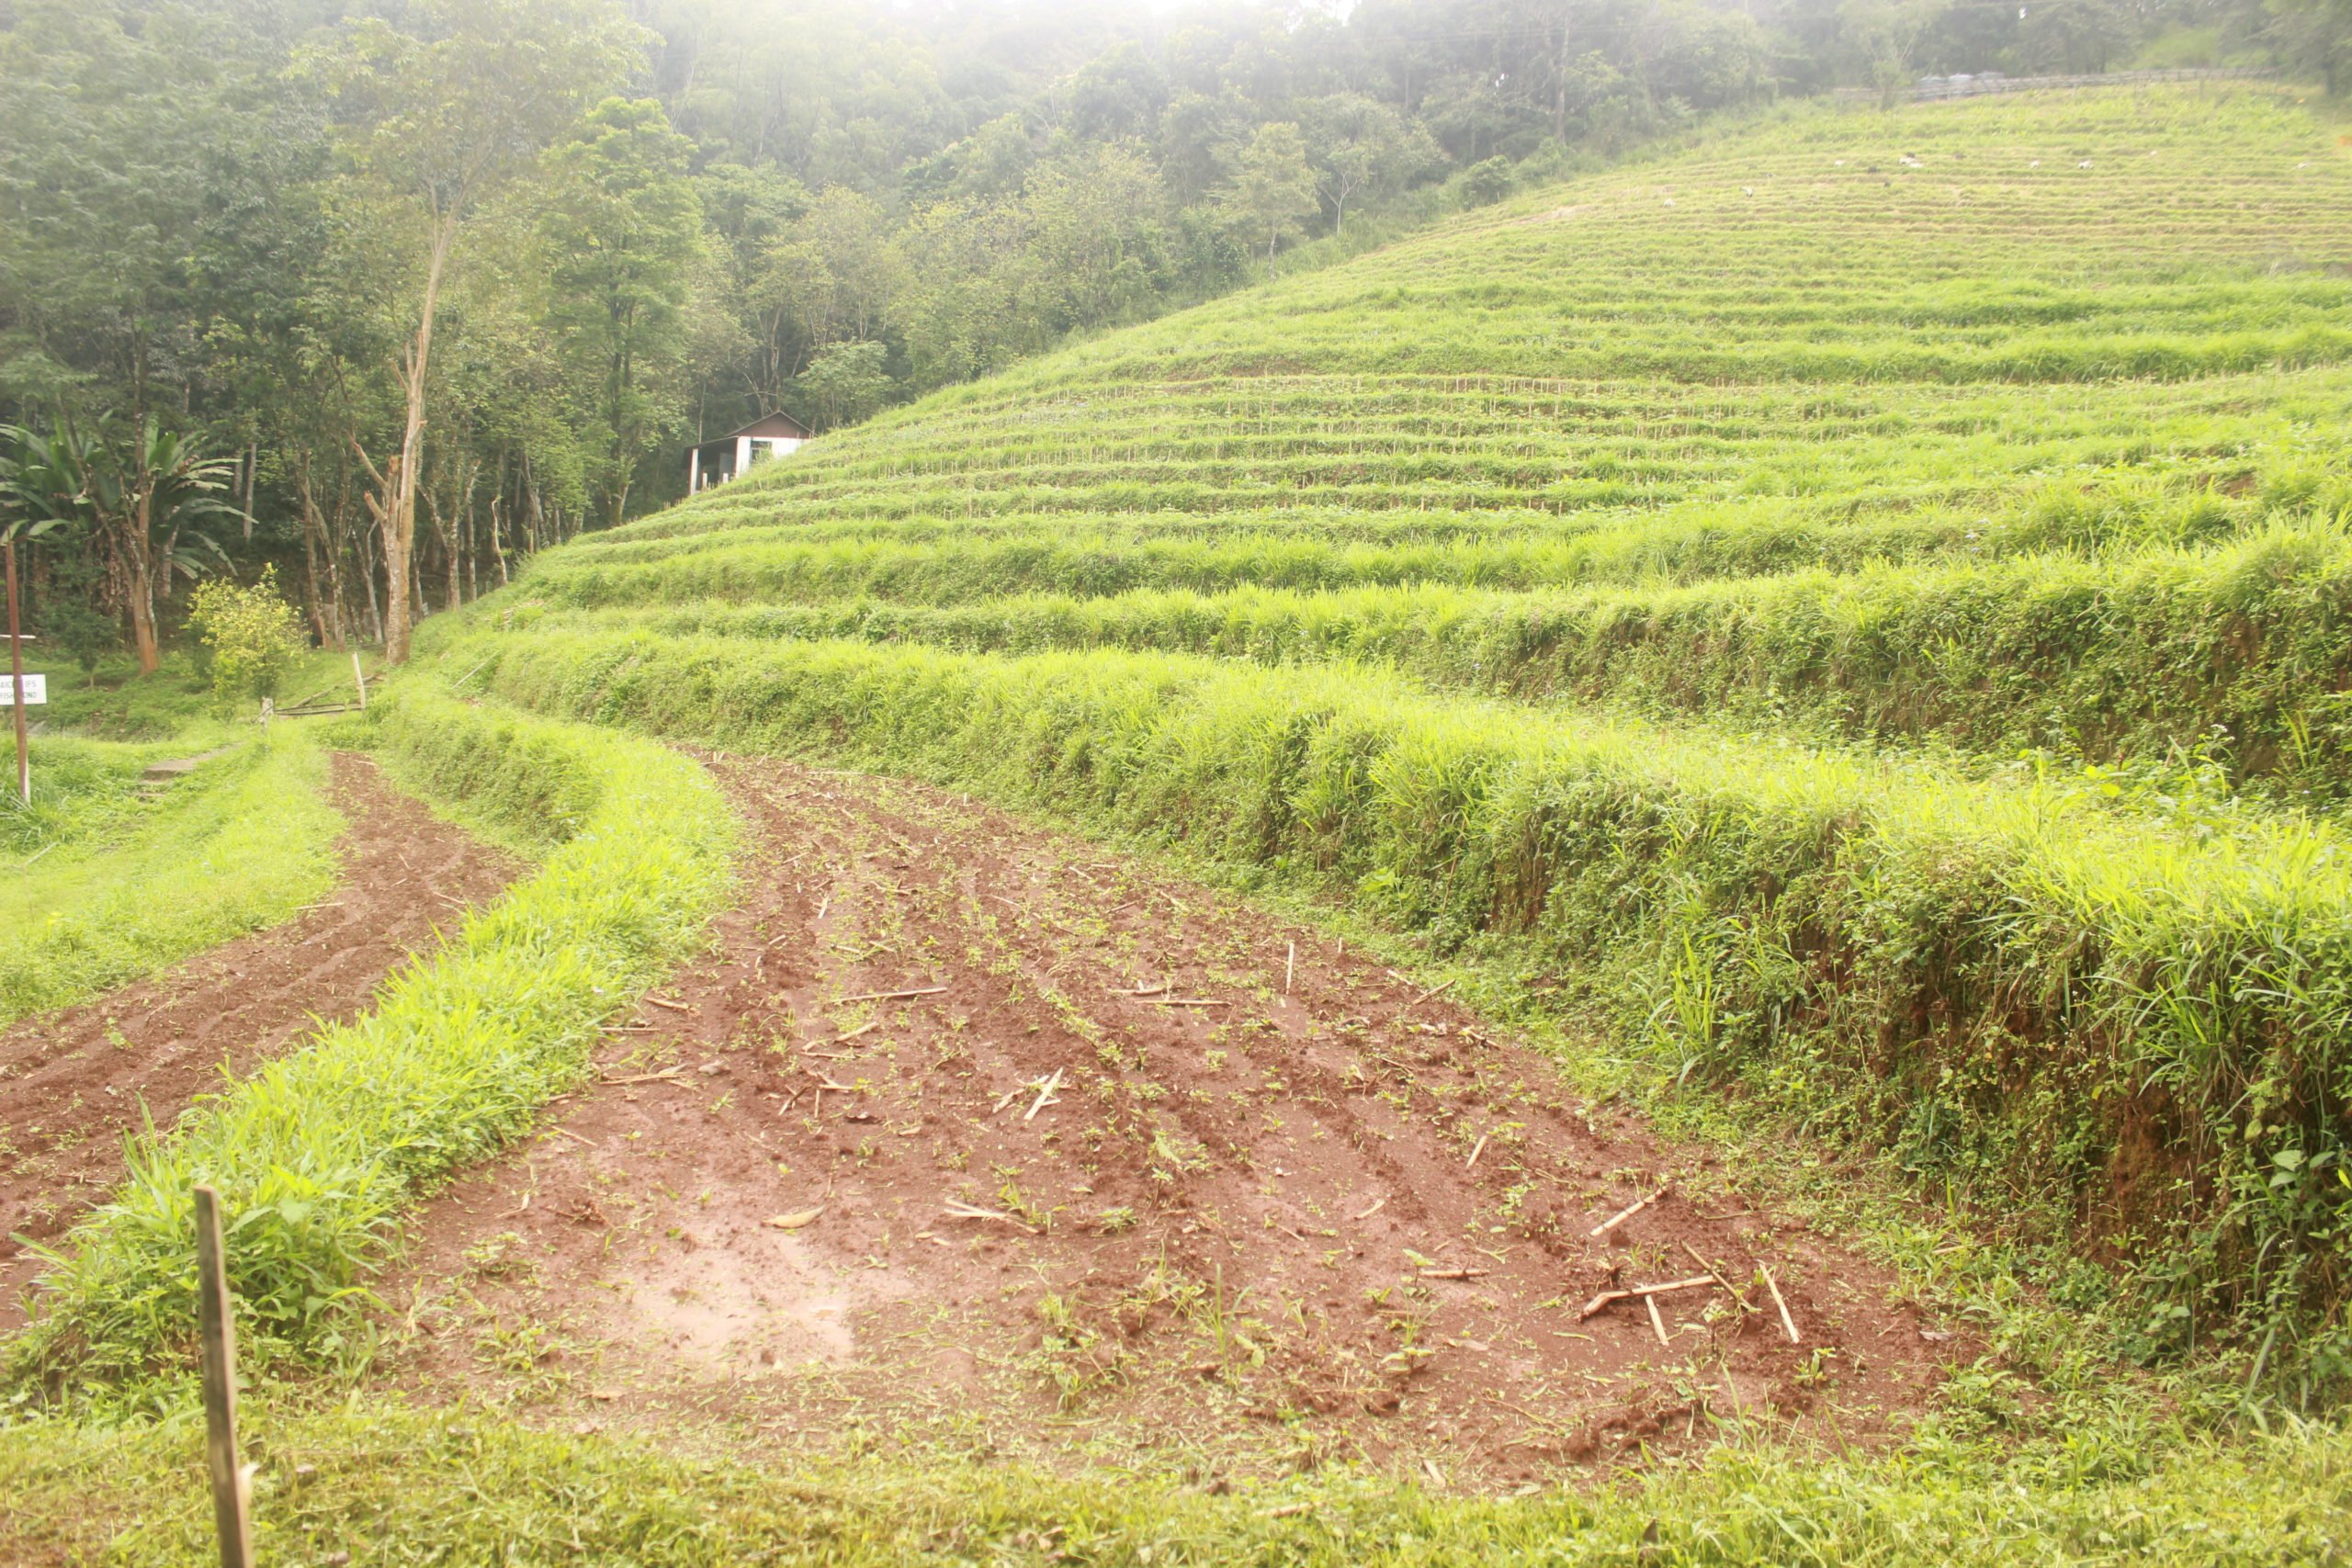 Terraced fields developed on the slope of a hill for farming. The IFS method is promoted in Meghalaya due to soil erosion.